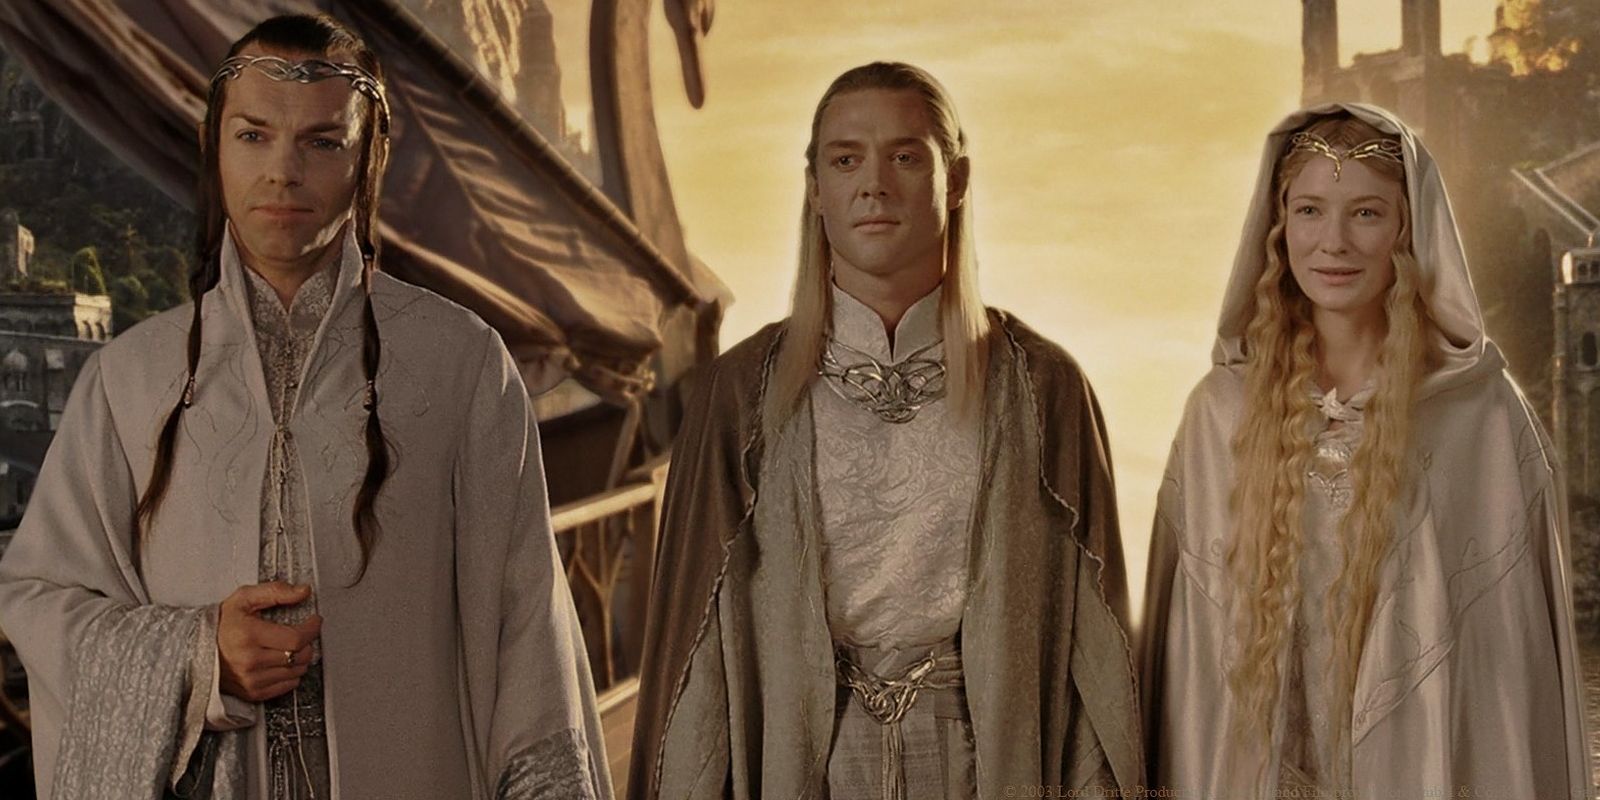 Elrond, Celeborn and Galadriel prepare to leave Middle-earth, in The Return of the King